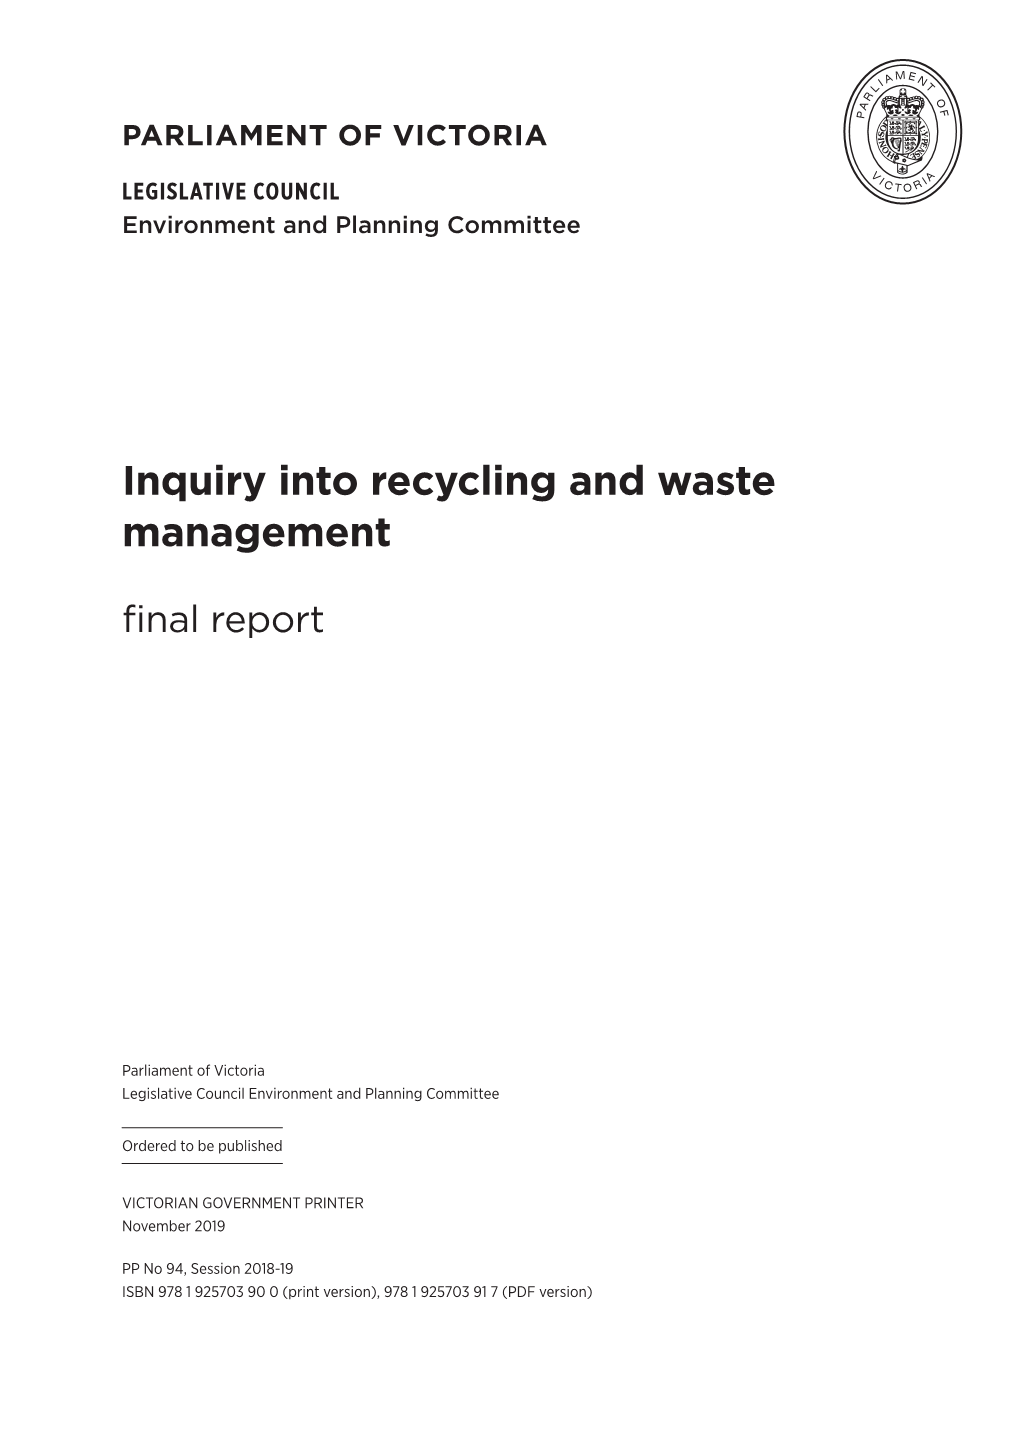 Inquiry Into Recycling and Waste Management: Final Report Iii About the Committee